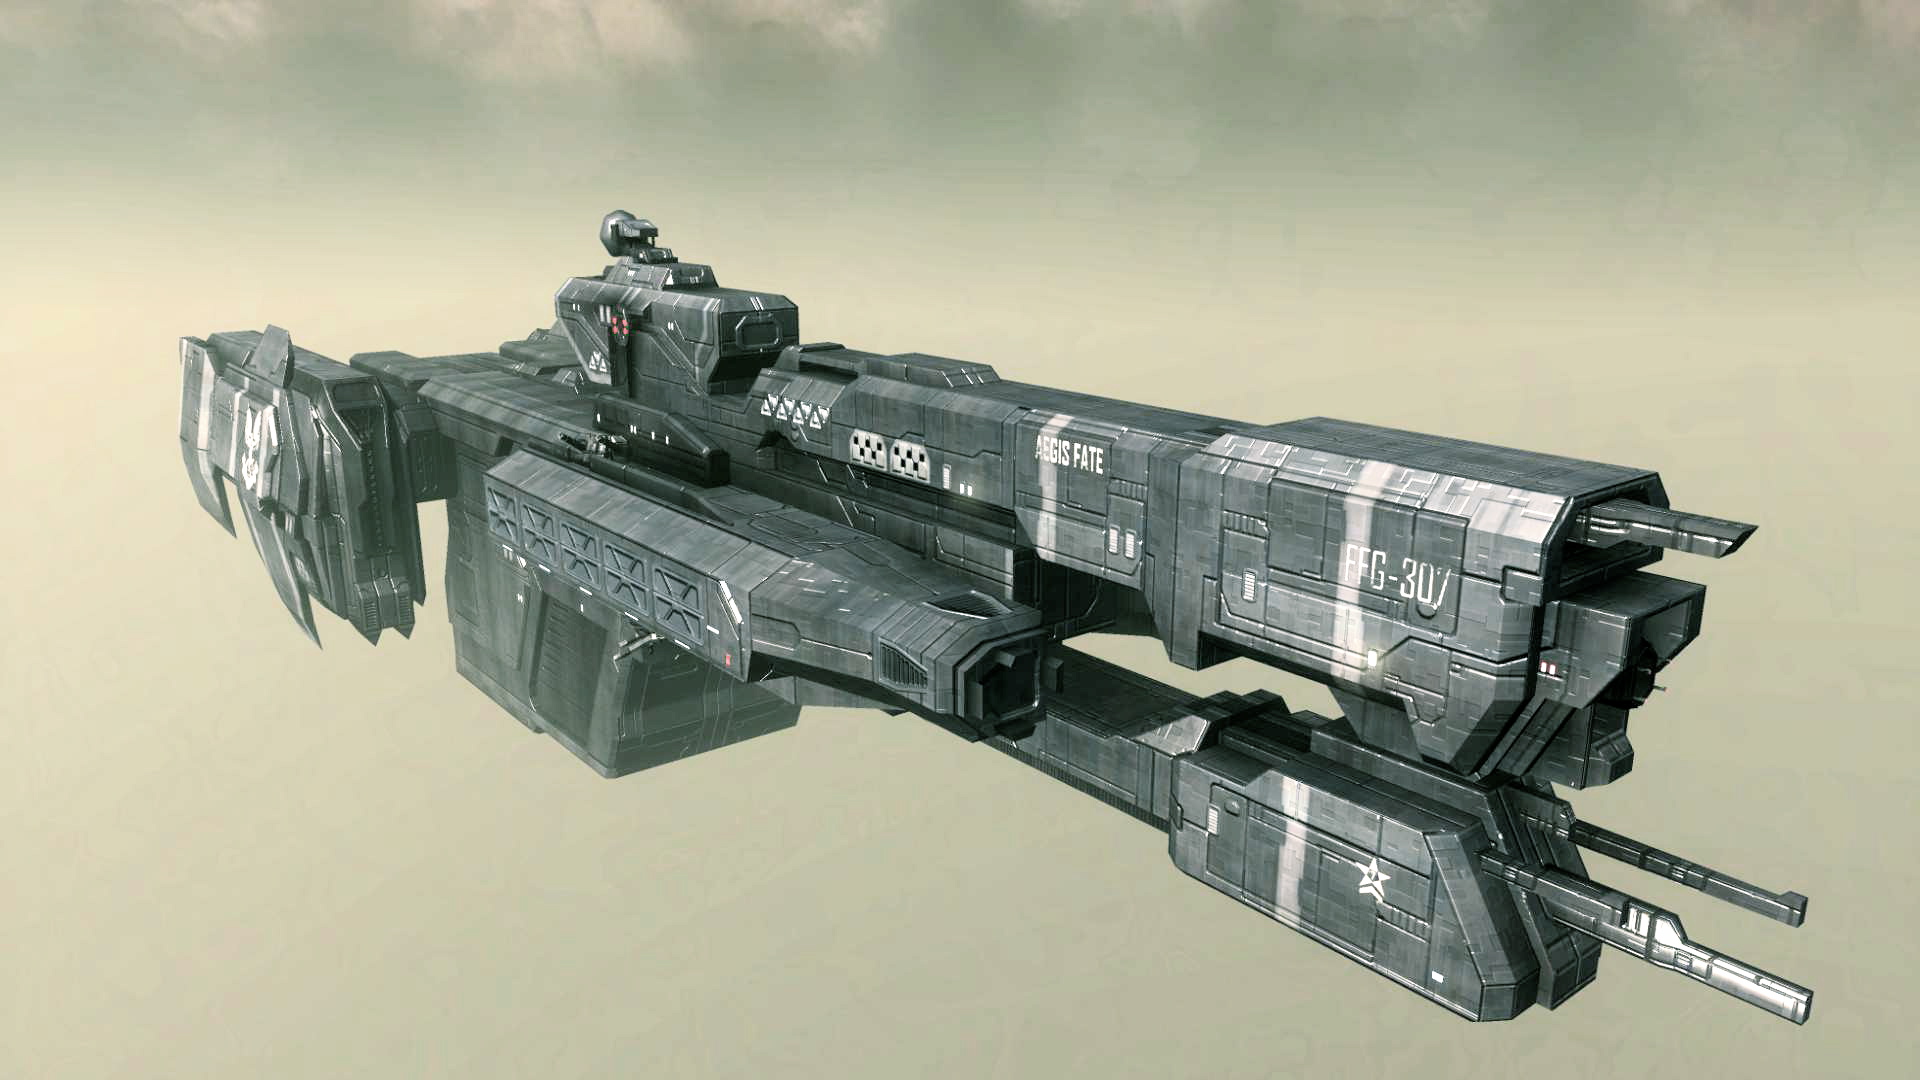 Halo Wars ships; Spirit Of Fire and other ships - egosoft.com